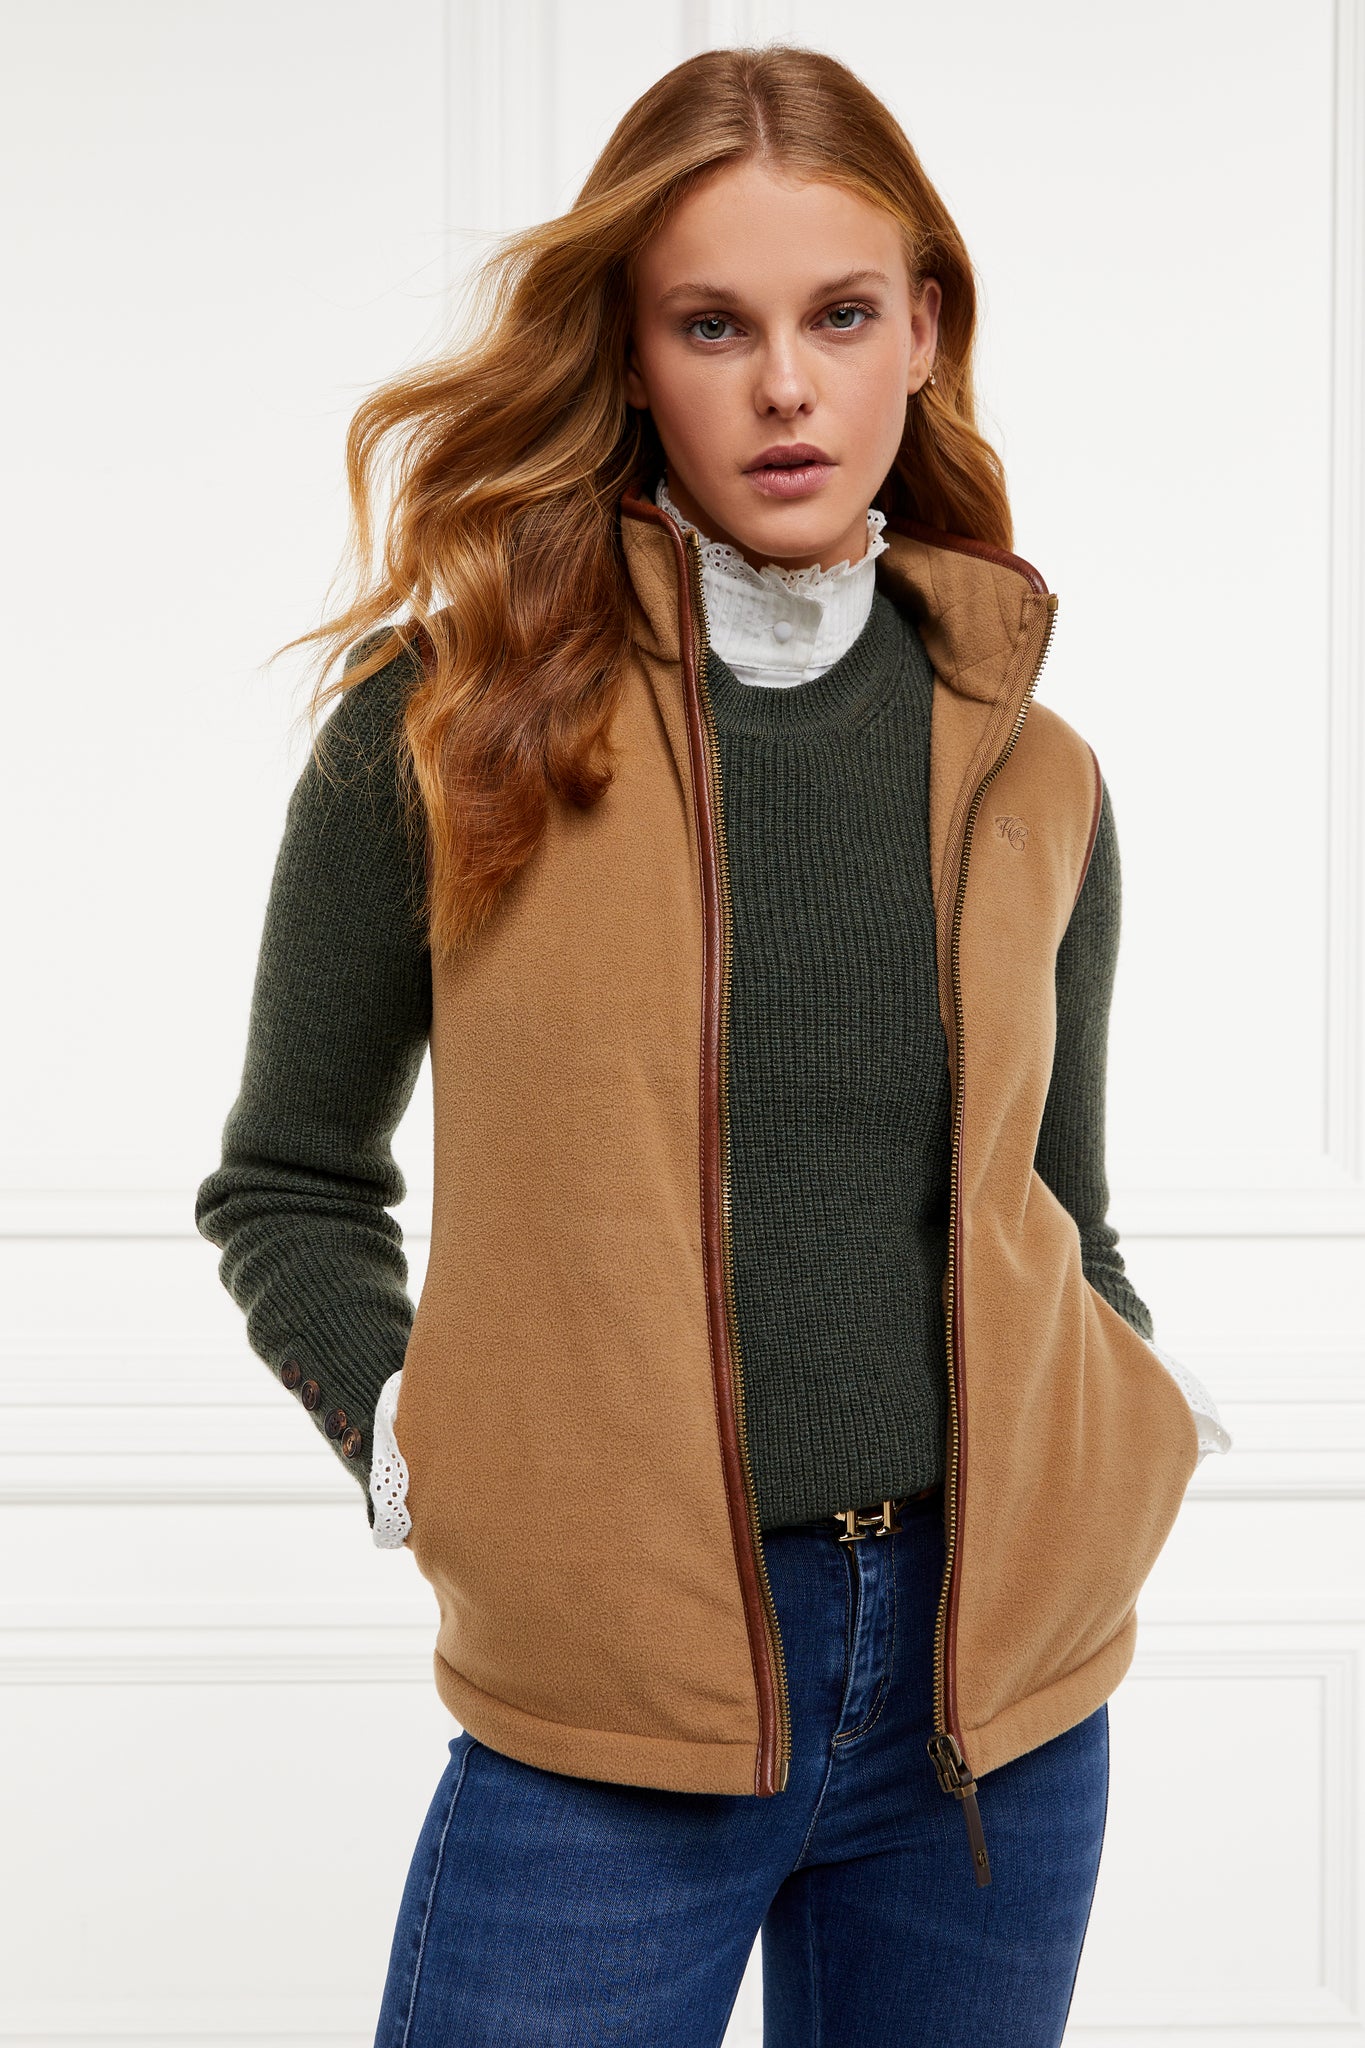 womens fleece gilet in light brown with dark brown leather piping around armholes neckline and down the front zip fastening a dark green knitted sweatshirt a white long sleeve shirt and dark denim skinny jeans